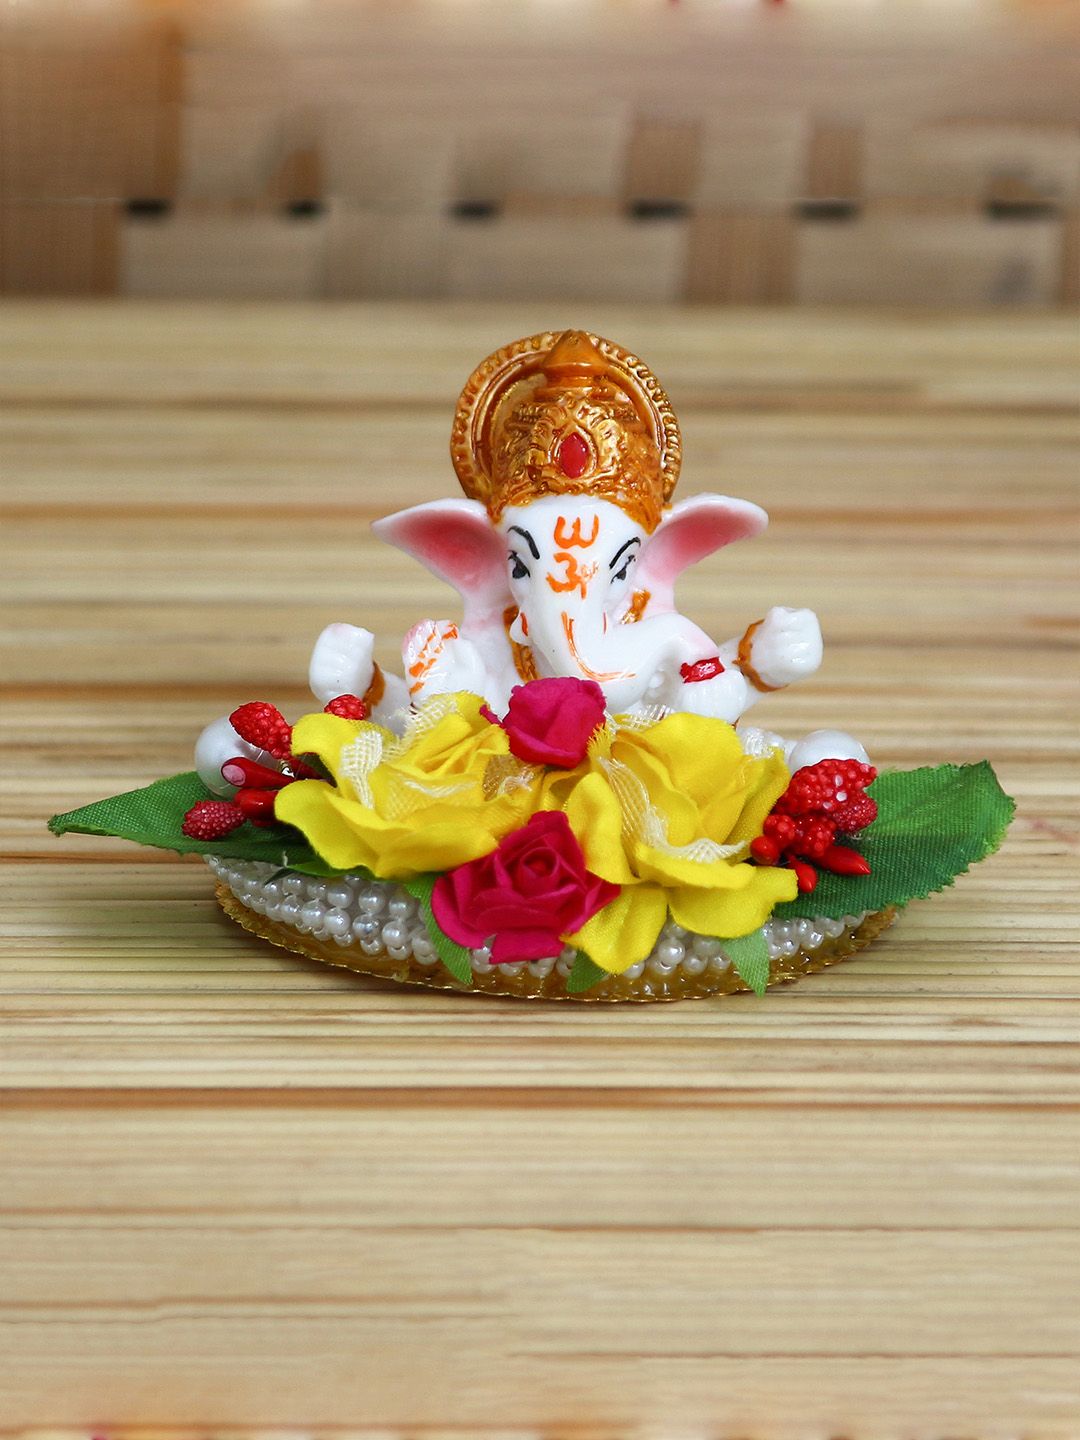 eCraftIndia White & Gold-Toned Handcrafted Lord Ganesha Idol on Decorated Plate Price in India